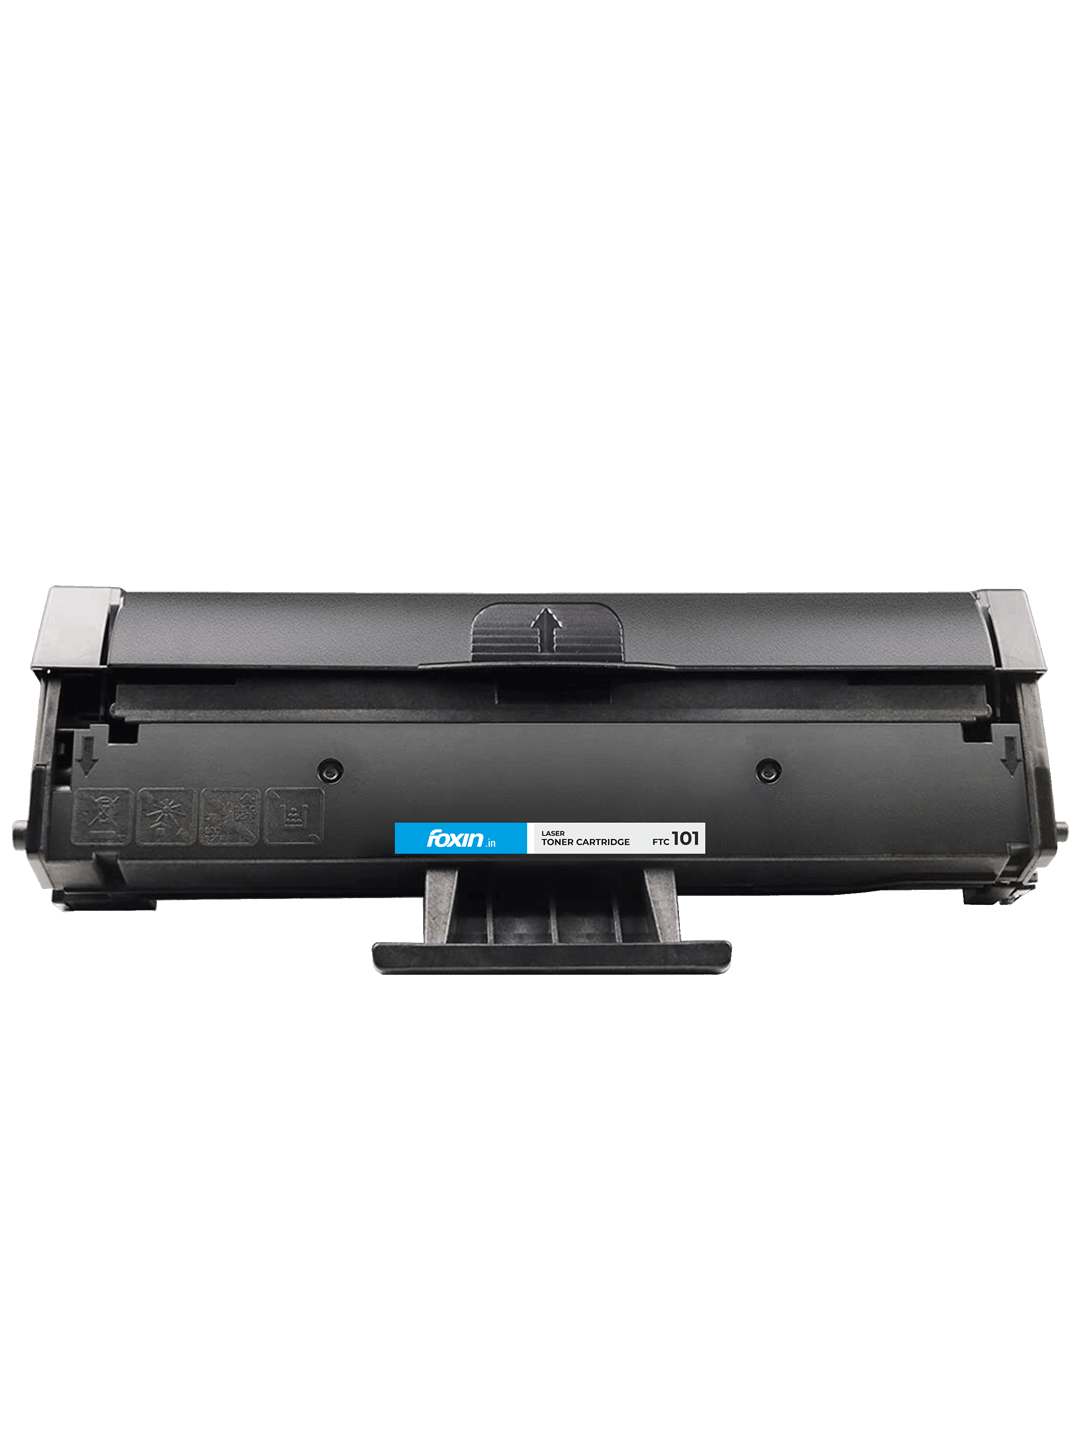 Foxin FTC 101 / 101S for MLT D101S Laser Toner Cartridge Use in  Samsung 101 ML 2161 /2162 /2163 /2164 /2165 /2165W /2166 /2166W /2168 /3401 /3405 /3400 /SF 760P /SF 761 Printers